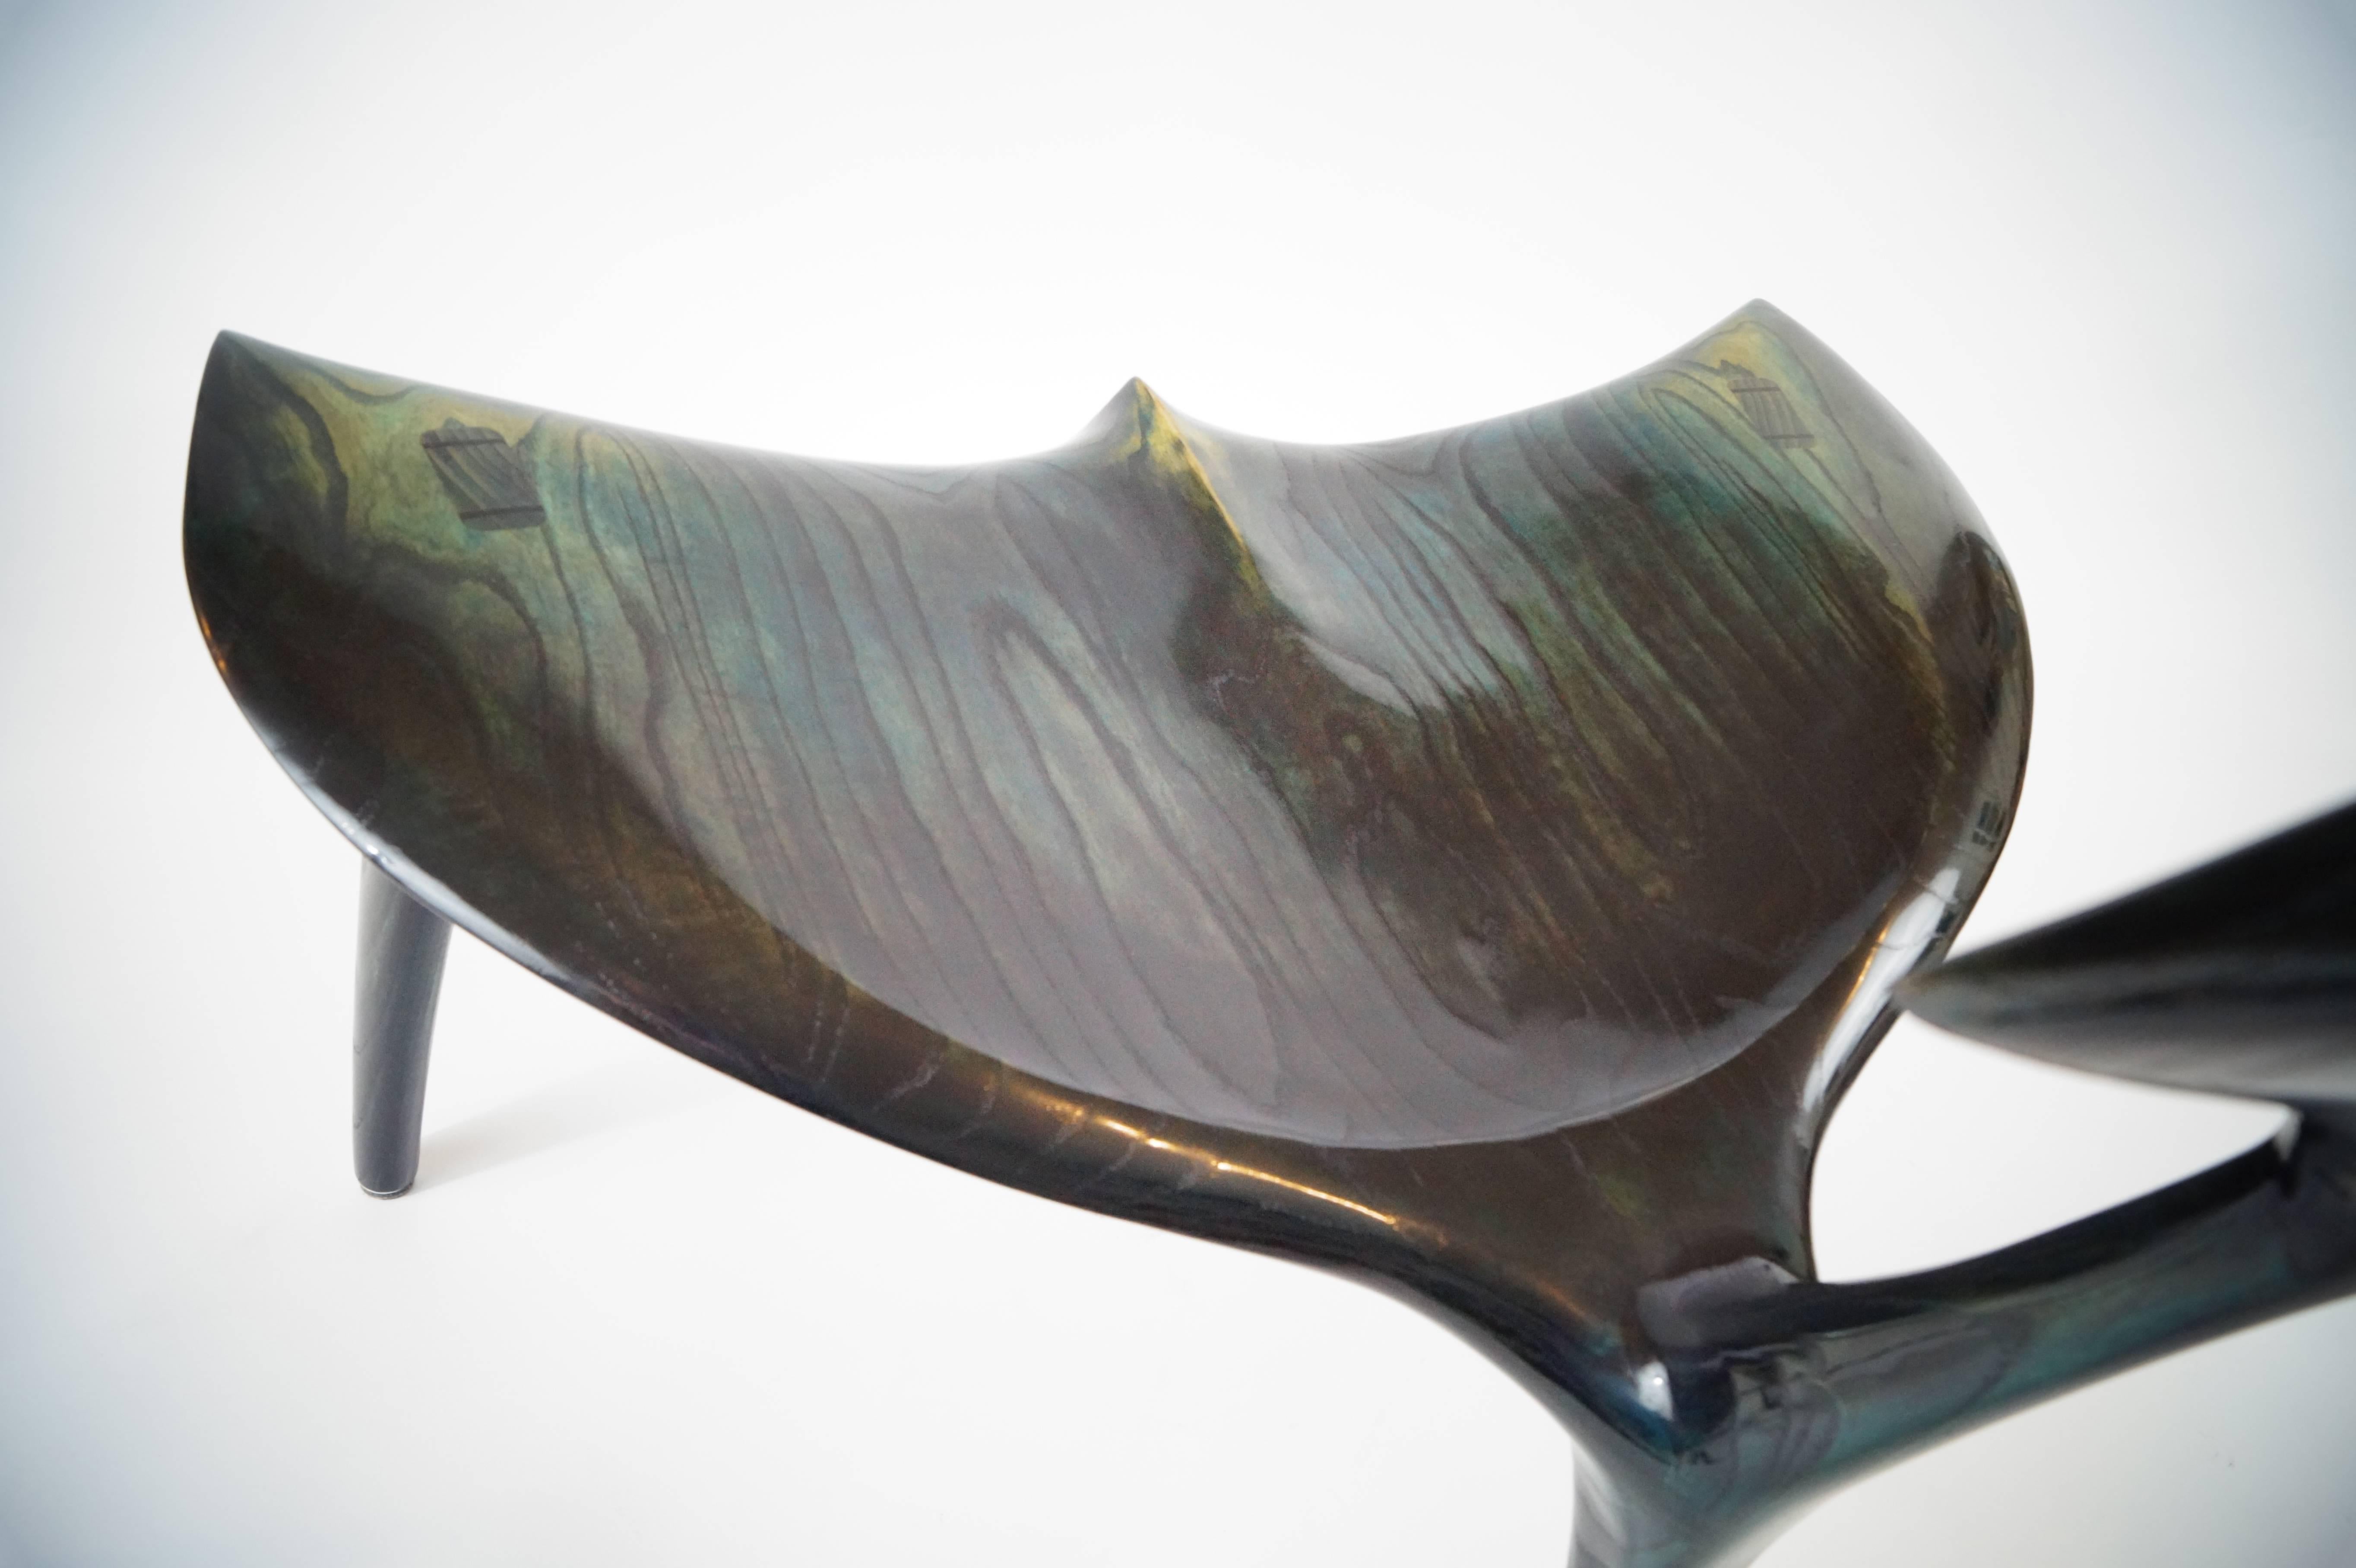 Contemporary Art Whale Chair MS82 Handcrafted and Designed by Morten Stenbaek